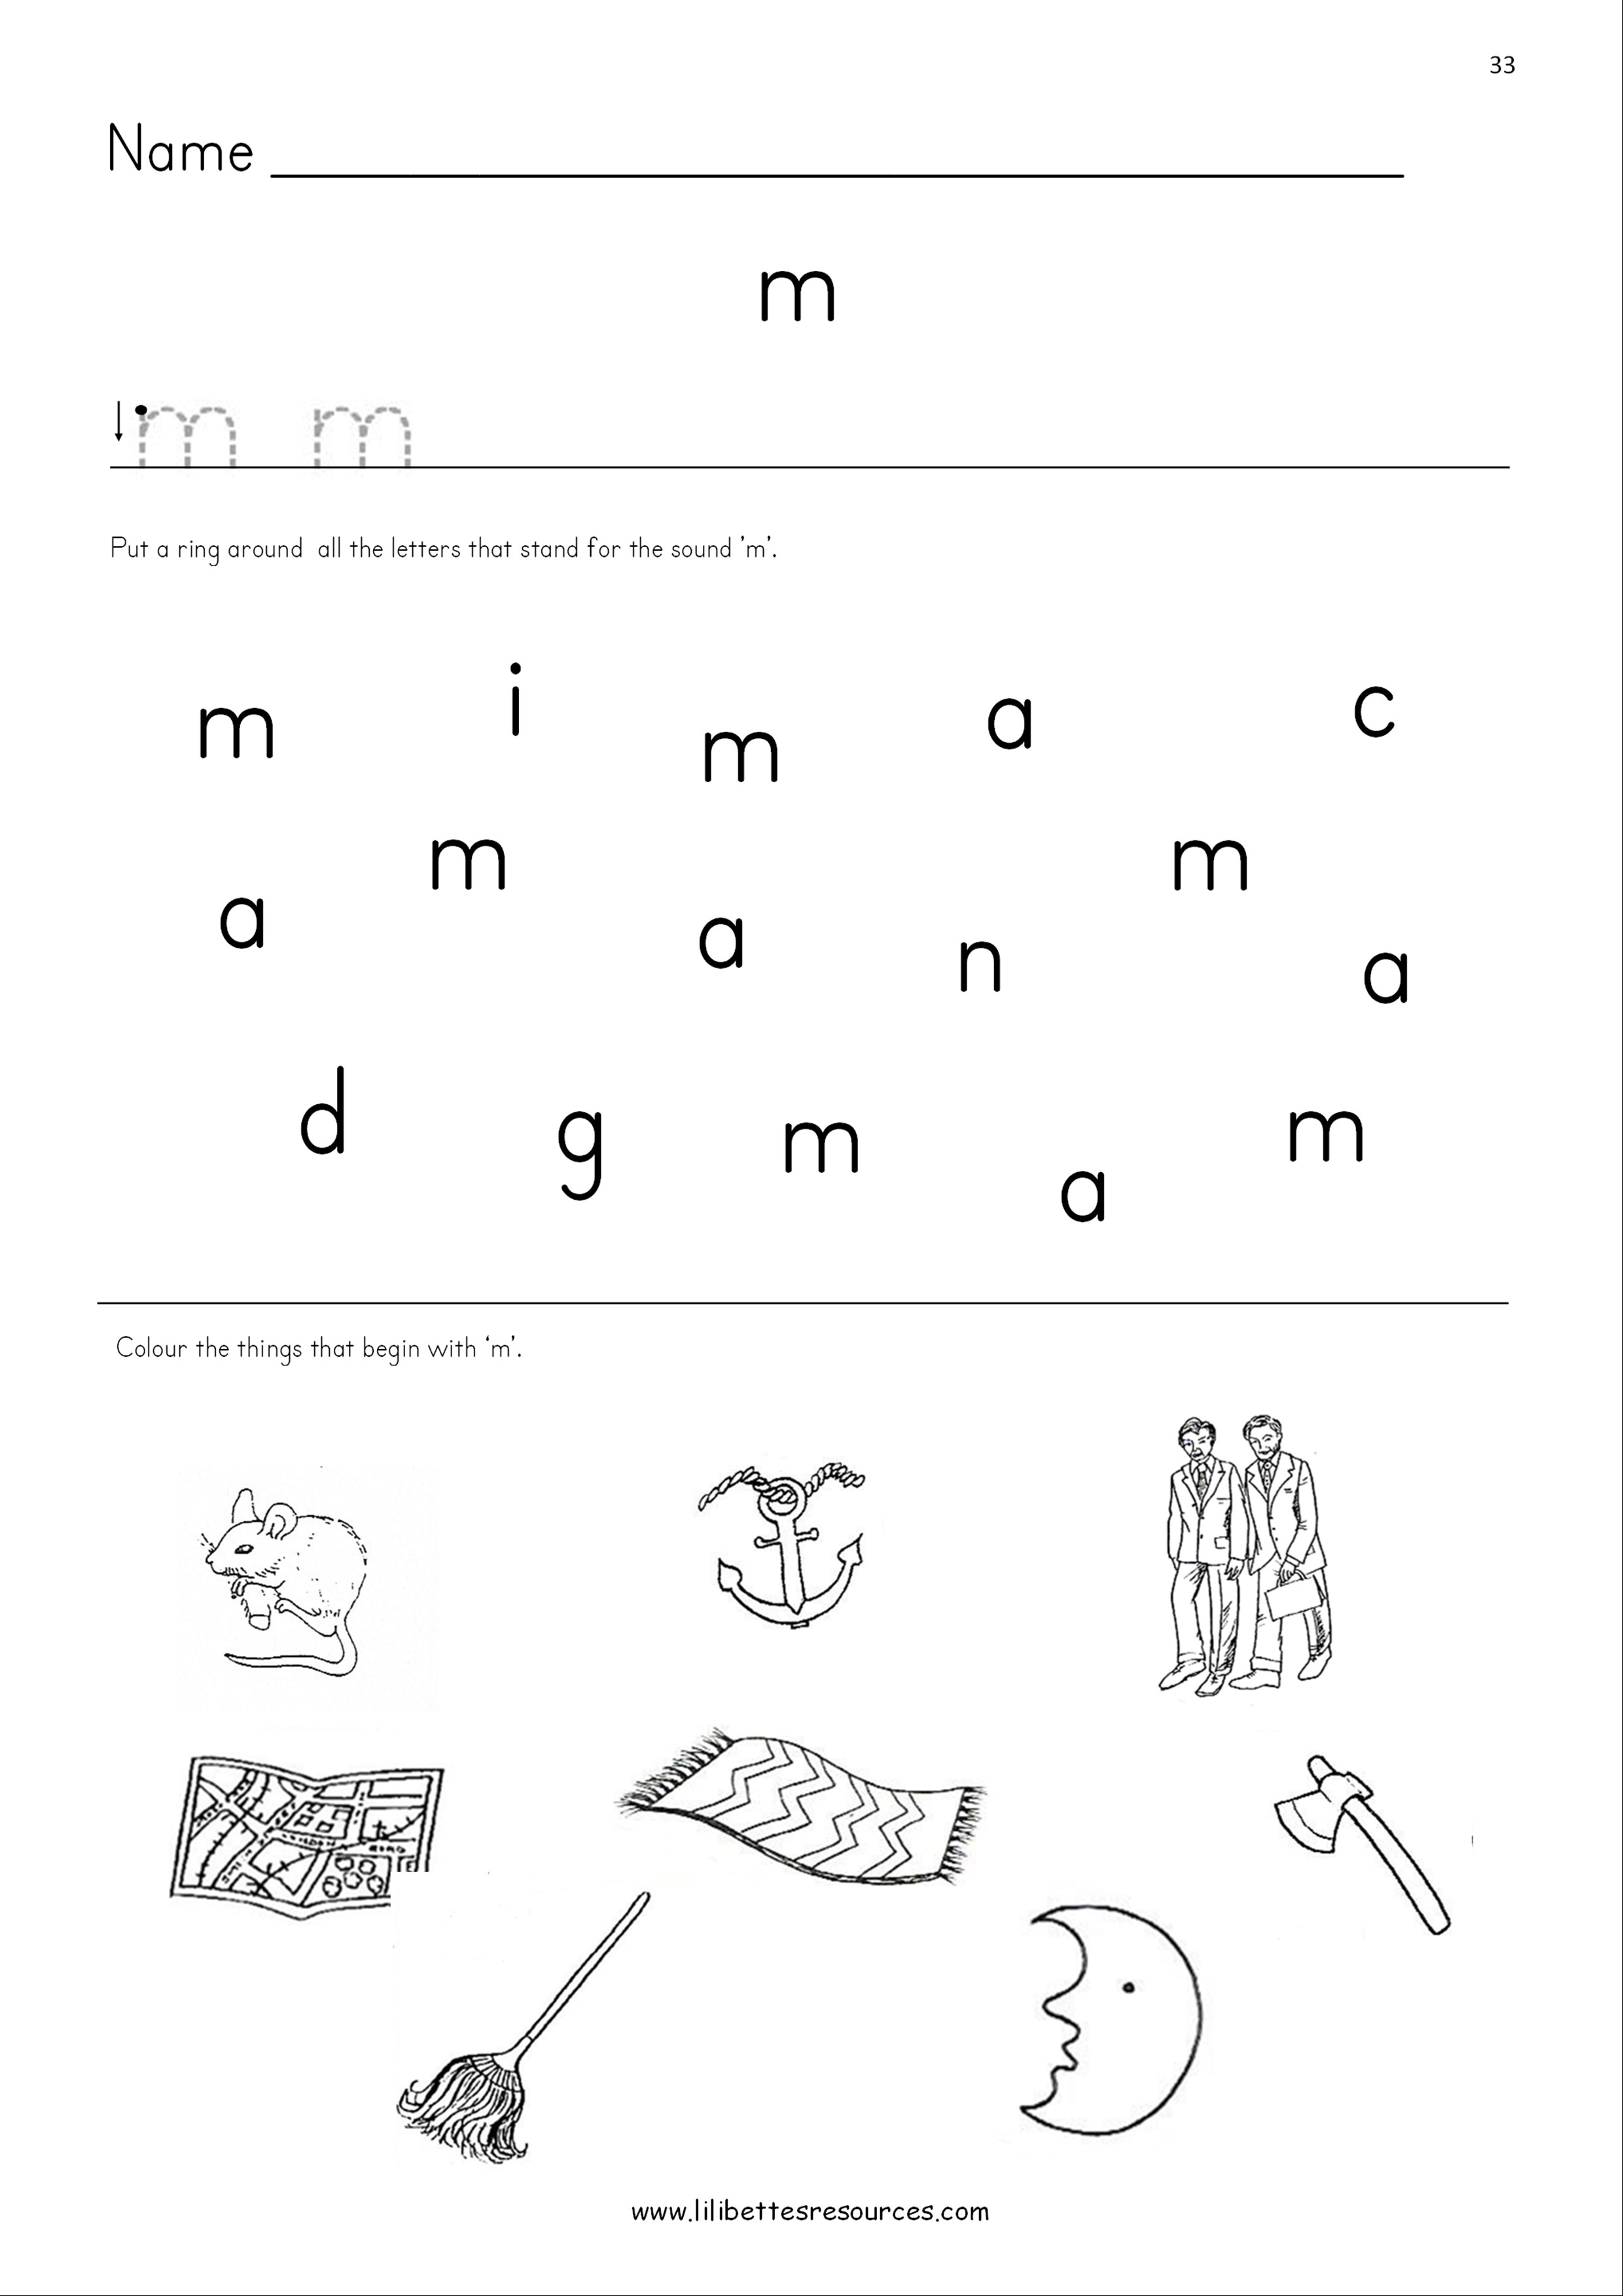 initial-sounds-worksheets-sound-it-out-phonics